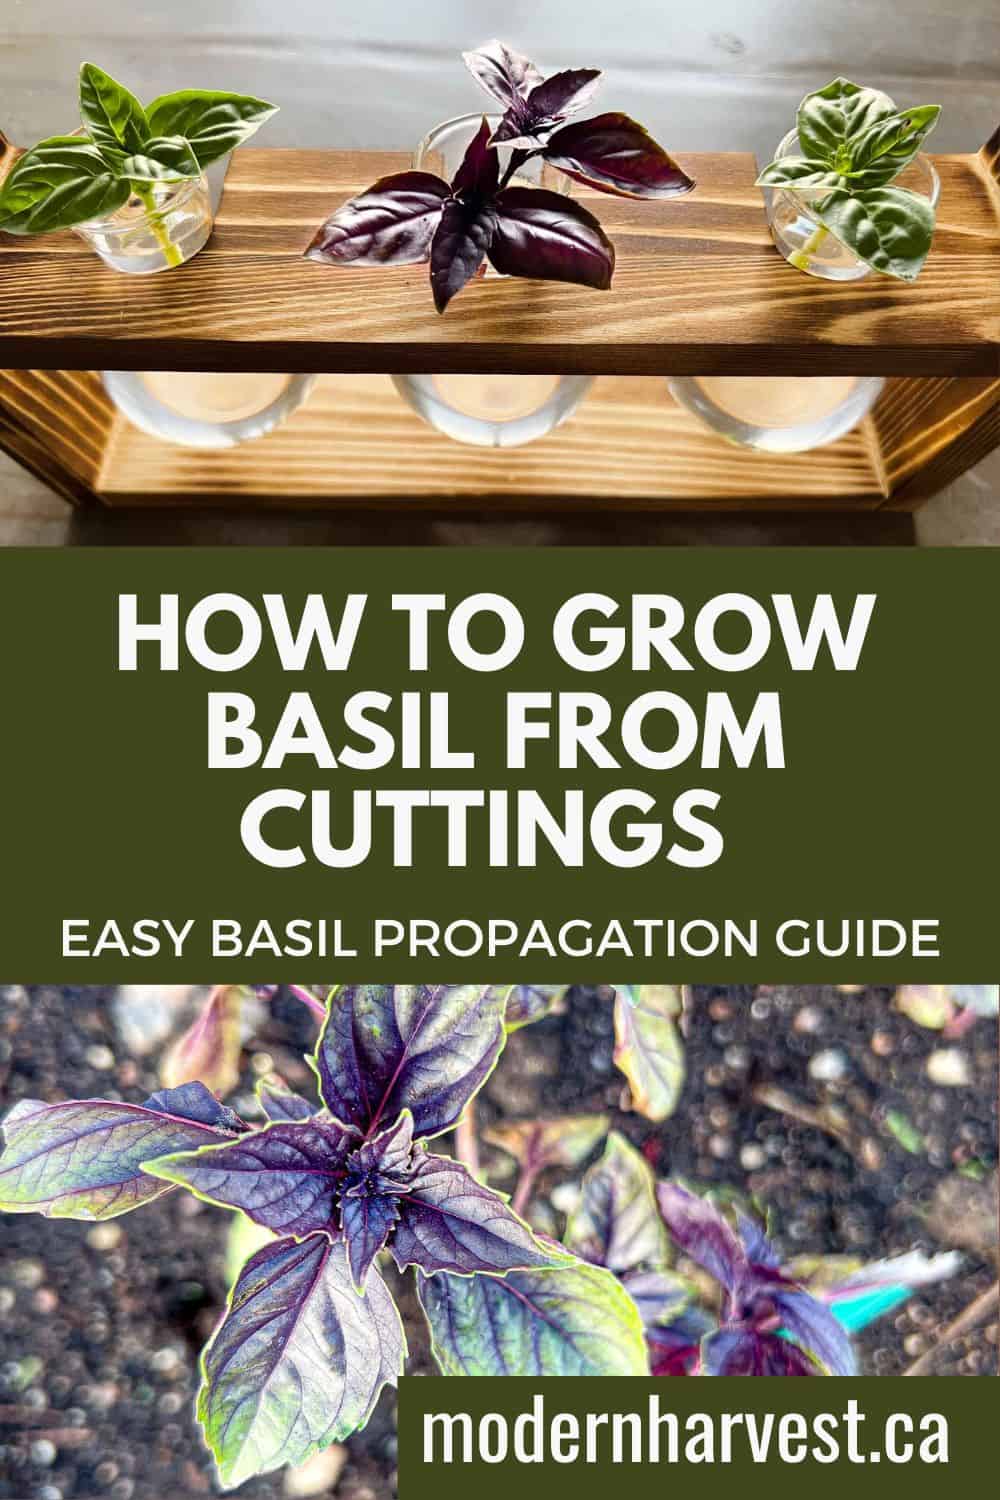 How to grow basil from cuttings pin image.